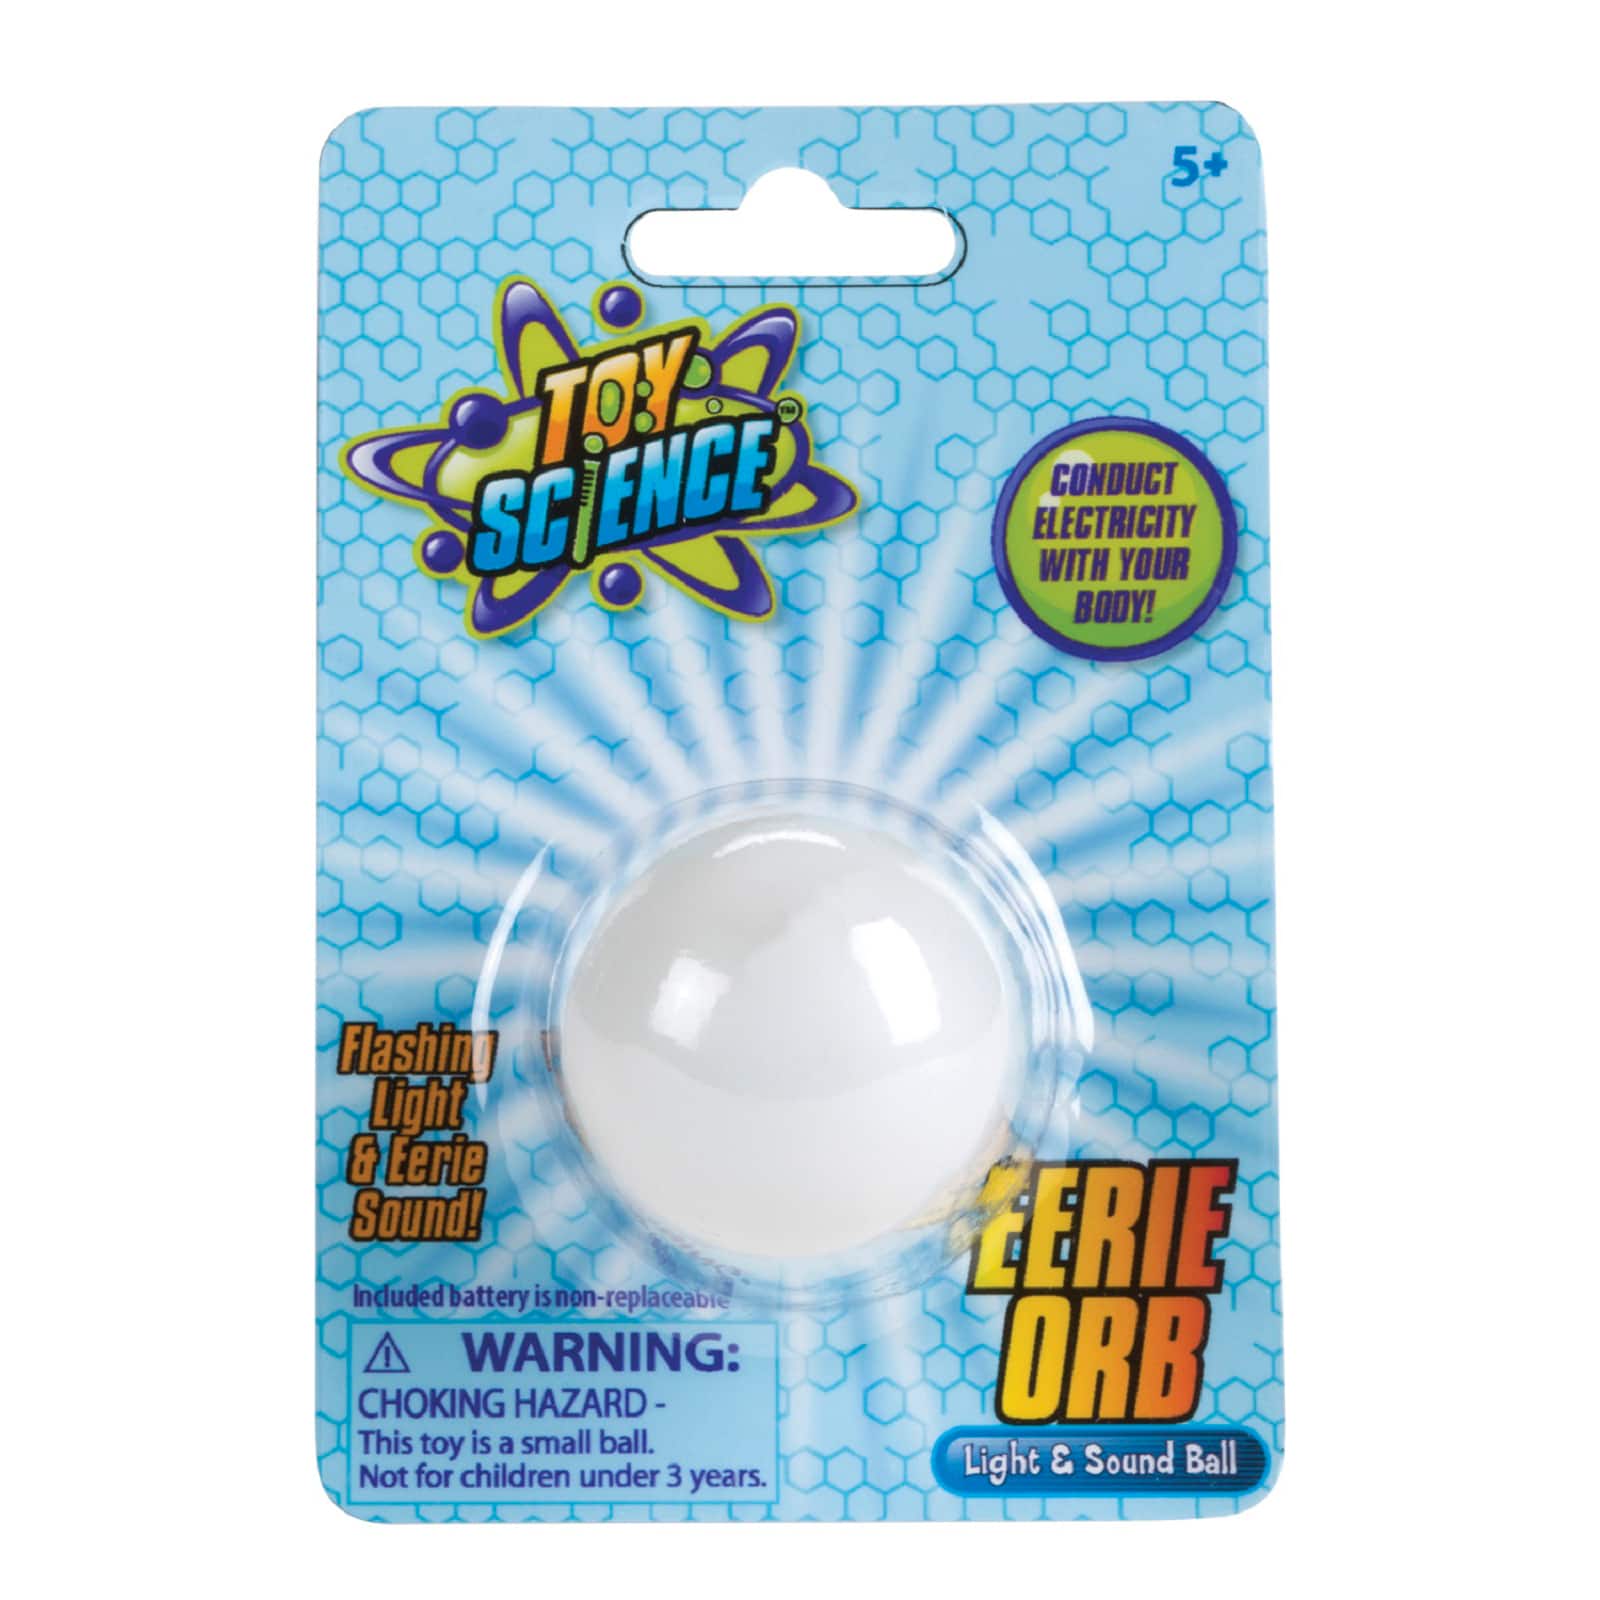 UFO Circuit Energy Ball Conductivity Electricity for sale online